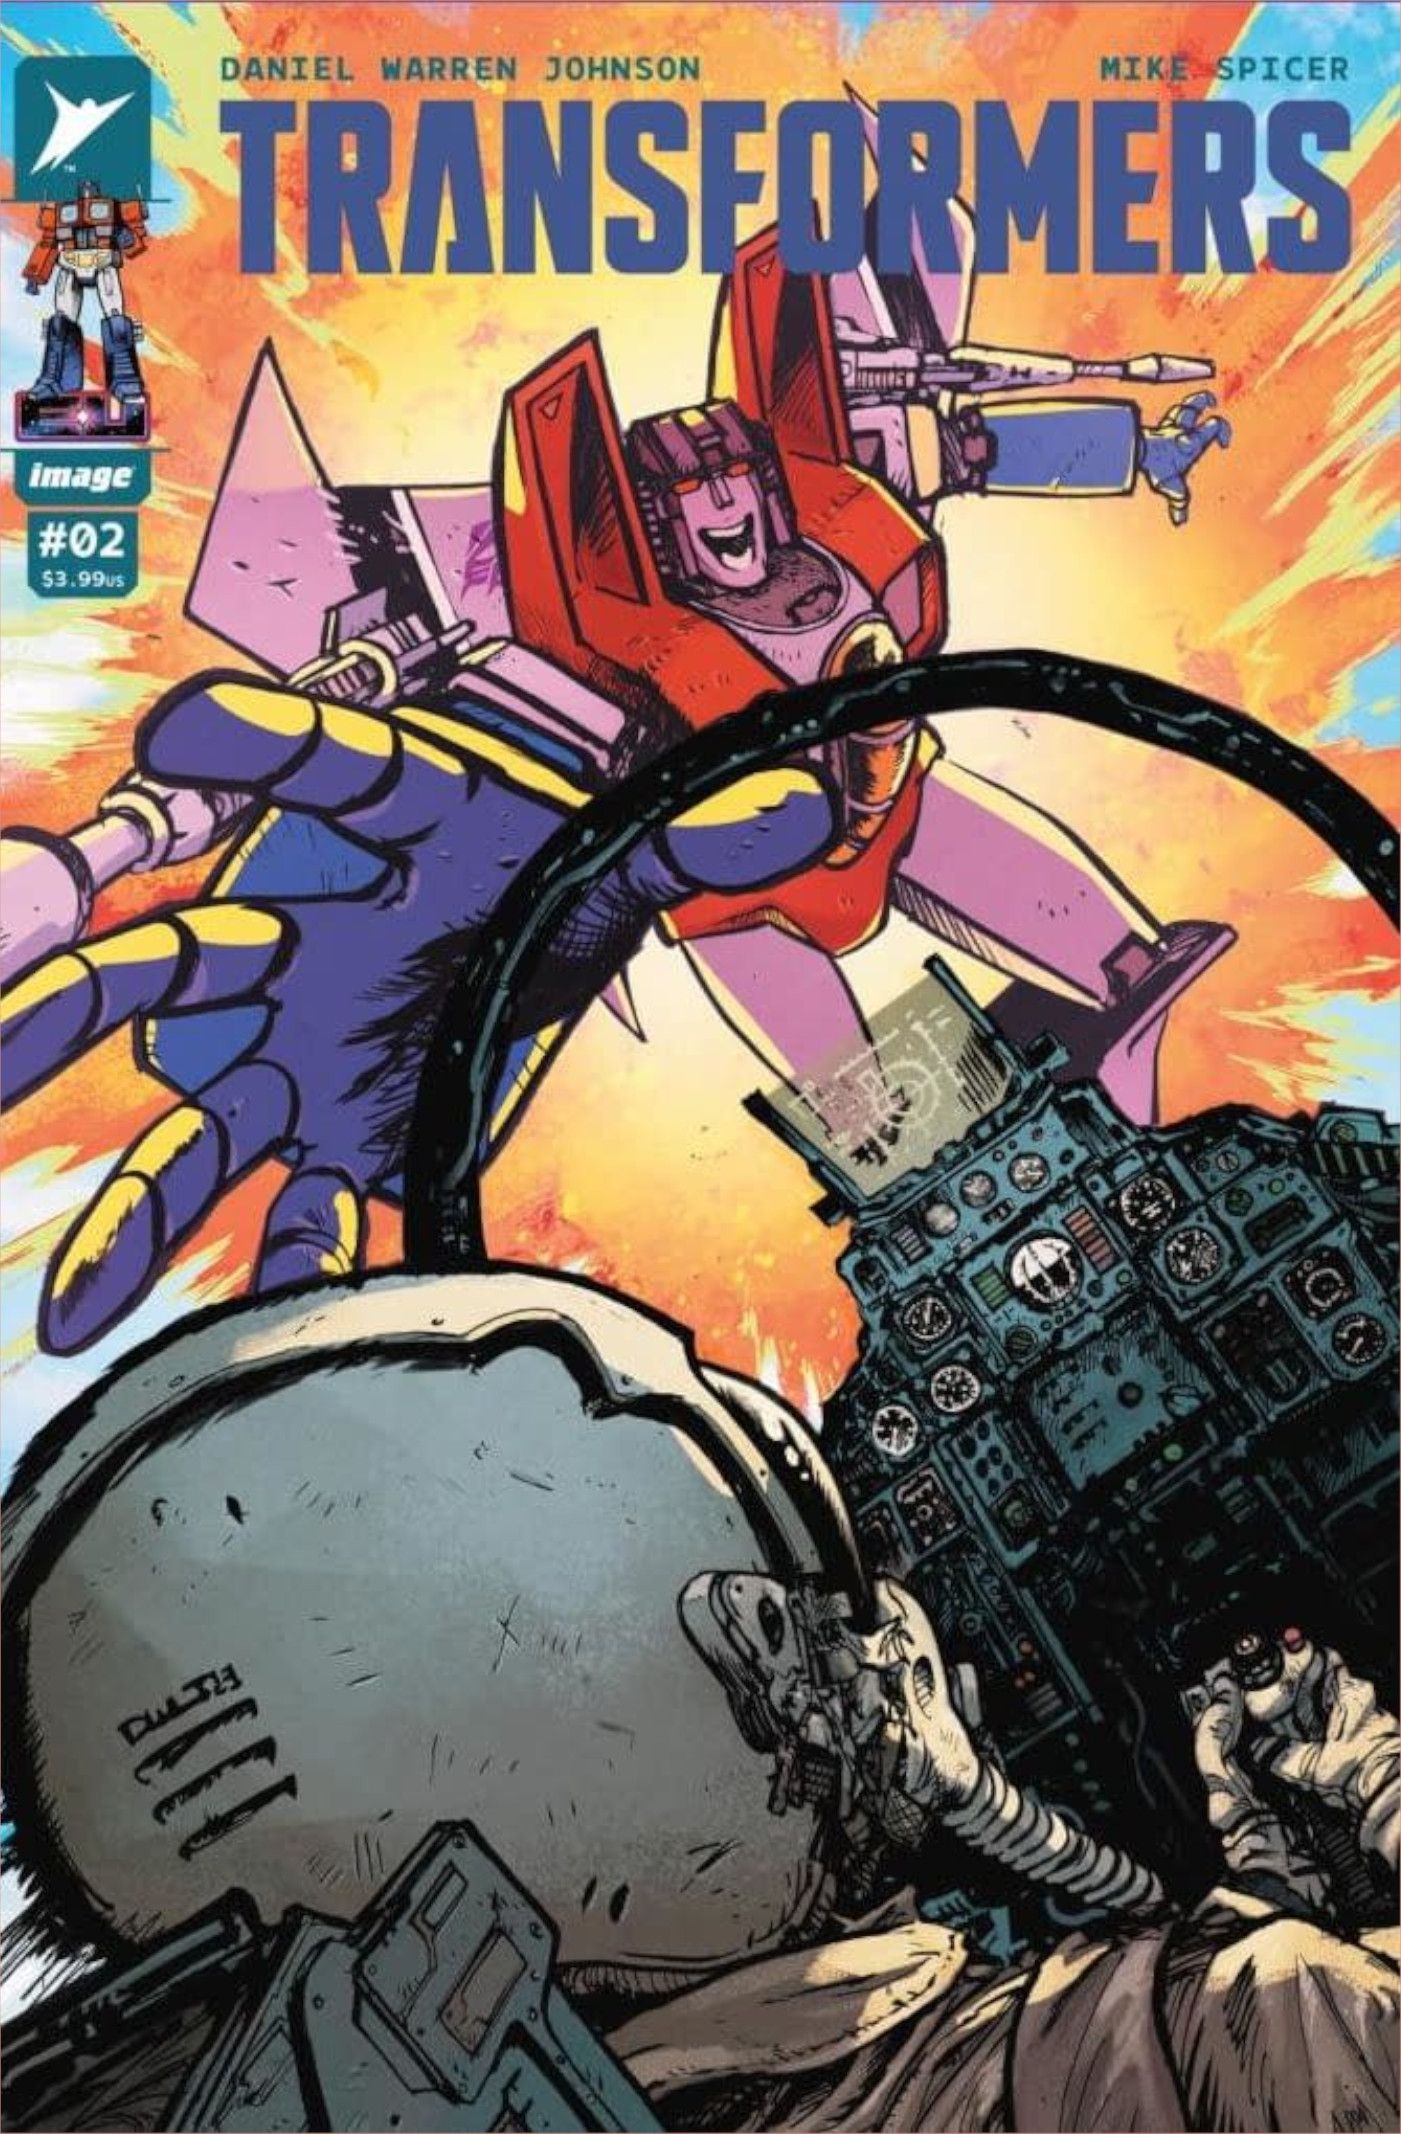 Transformers #2 main cover, Starscream attacking a fighter jet